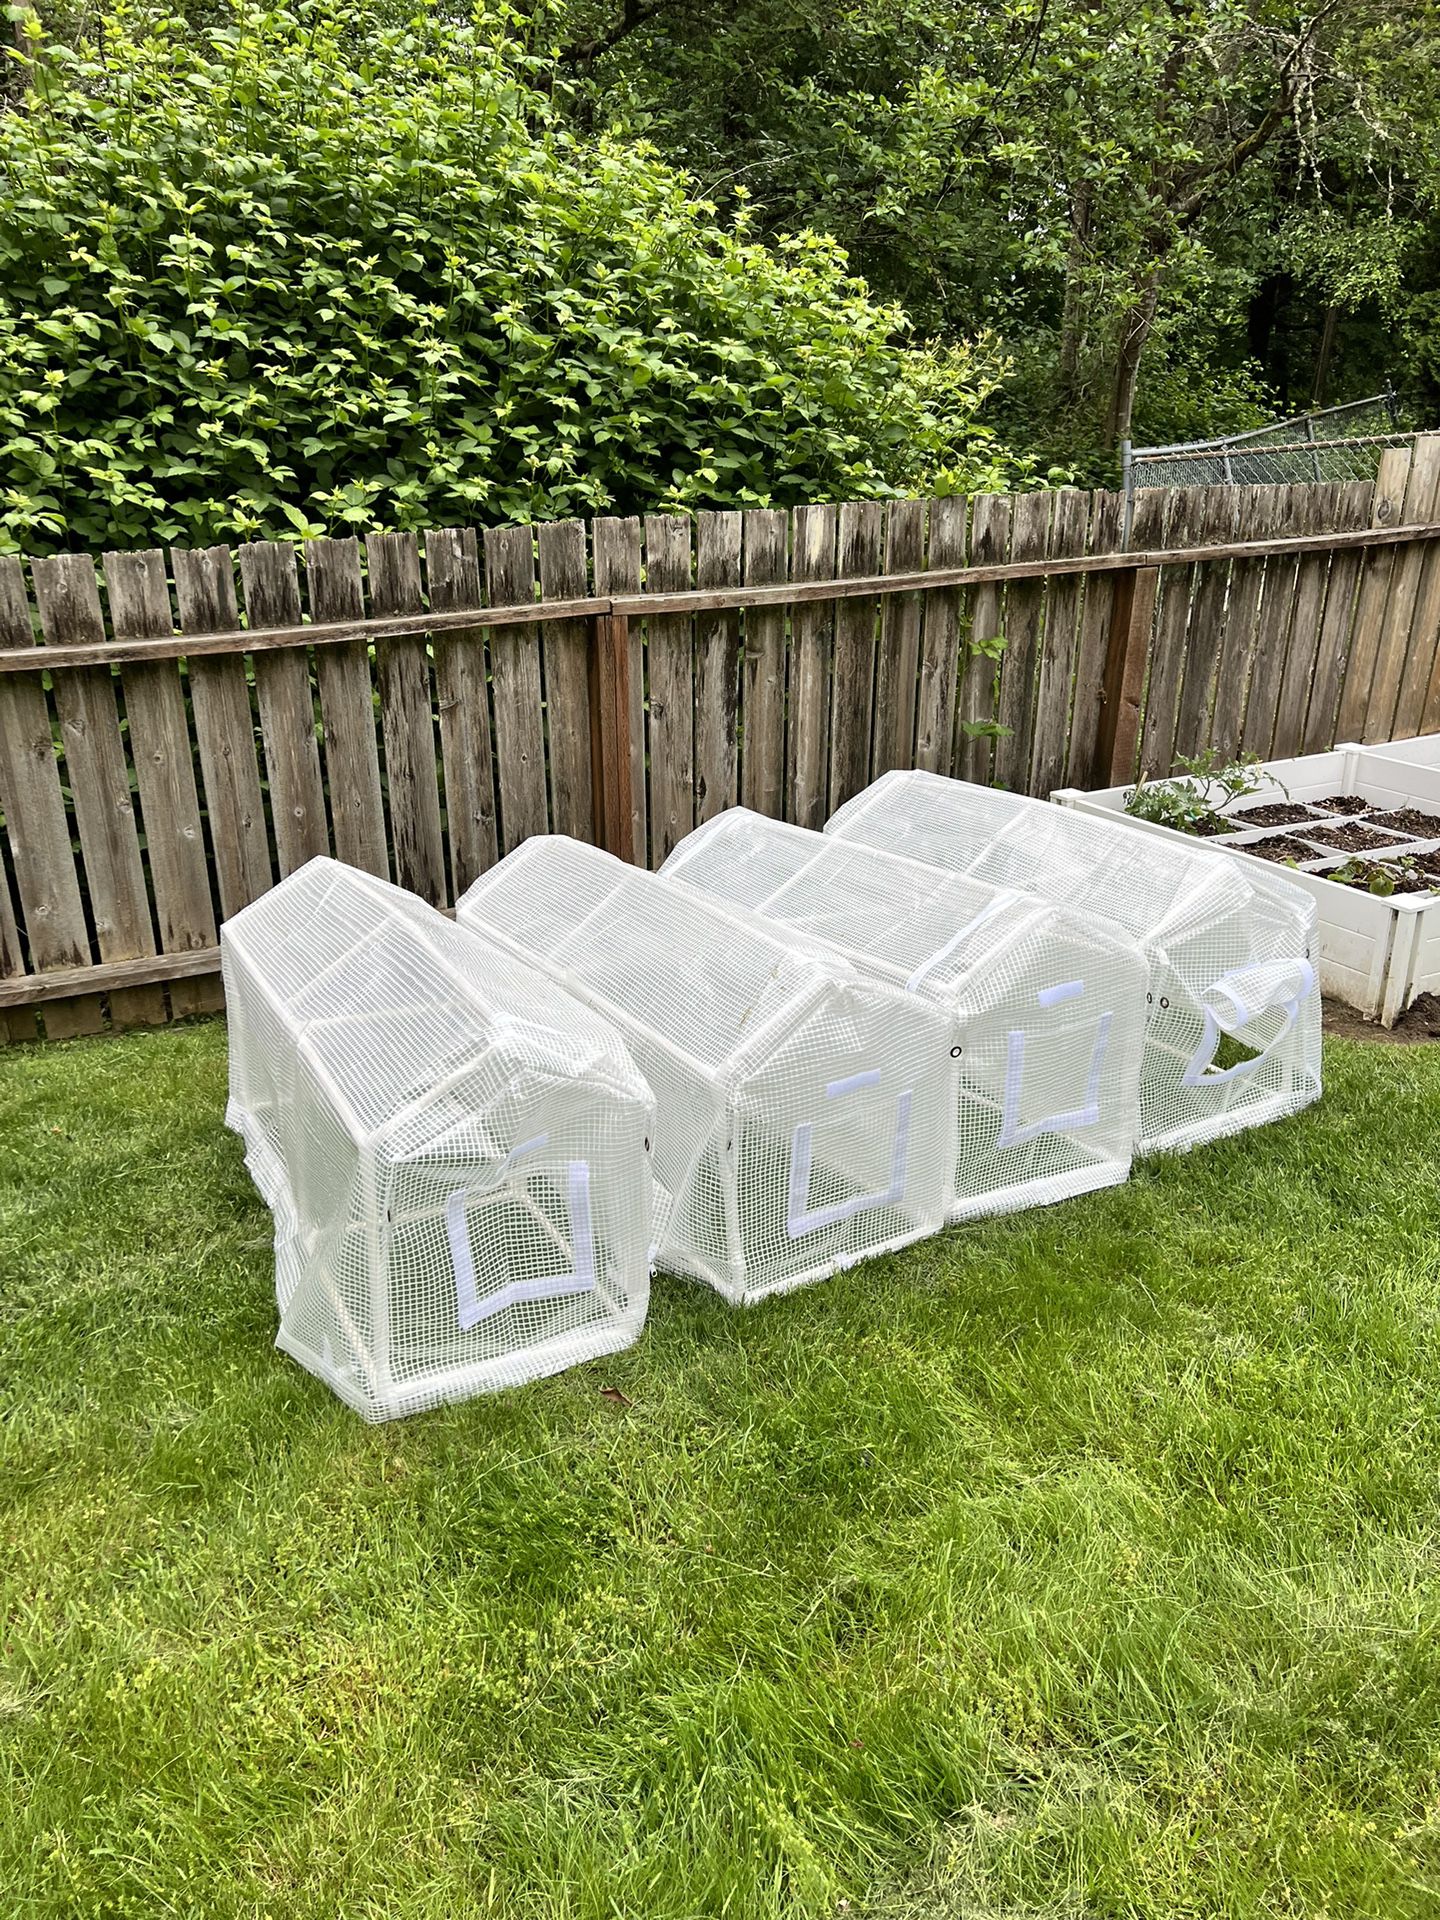 Easy-Install Outdoor Greenhouse - Uv Protection, Thick Pe/Pvc Material, Wind & Rainproof For Potted Plants